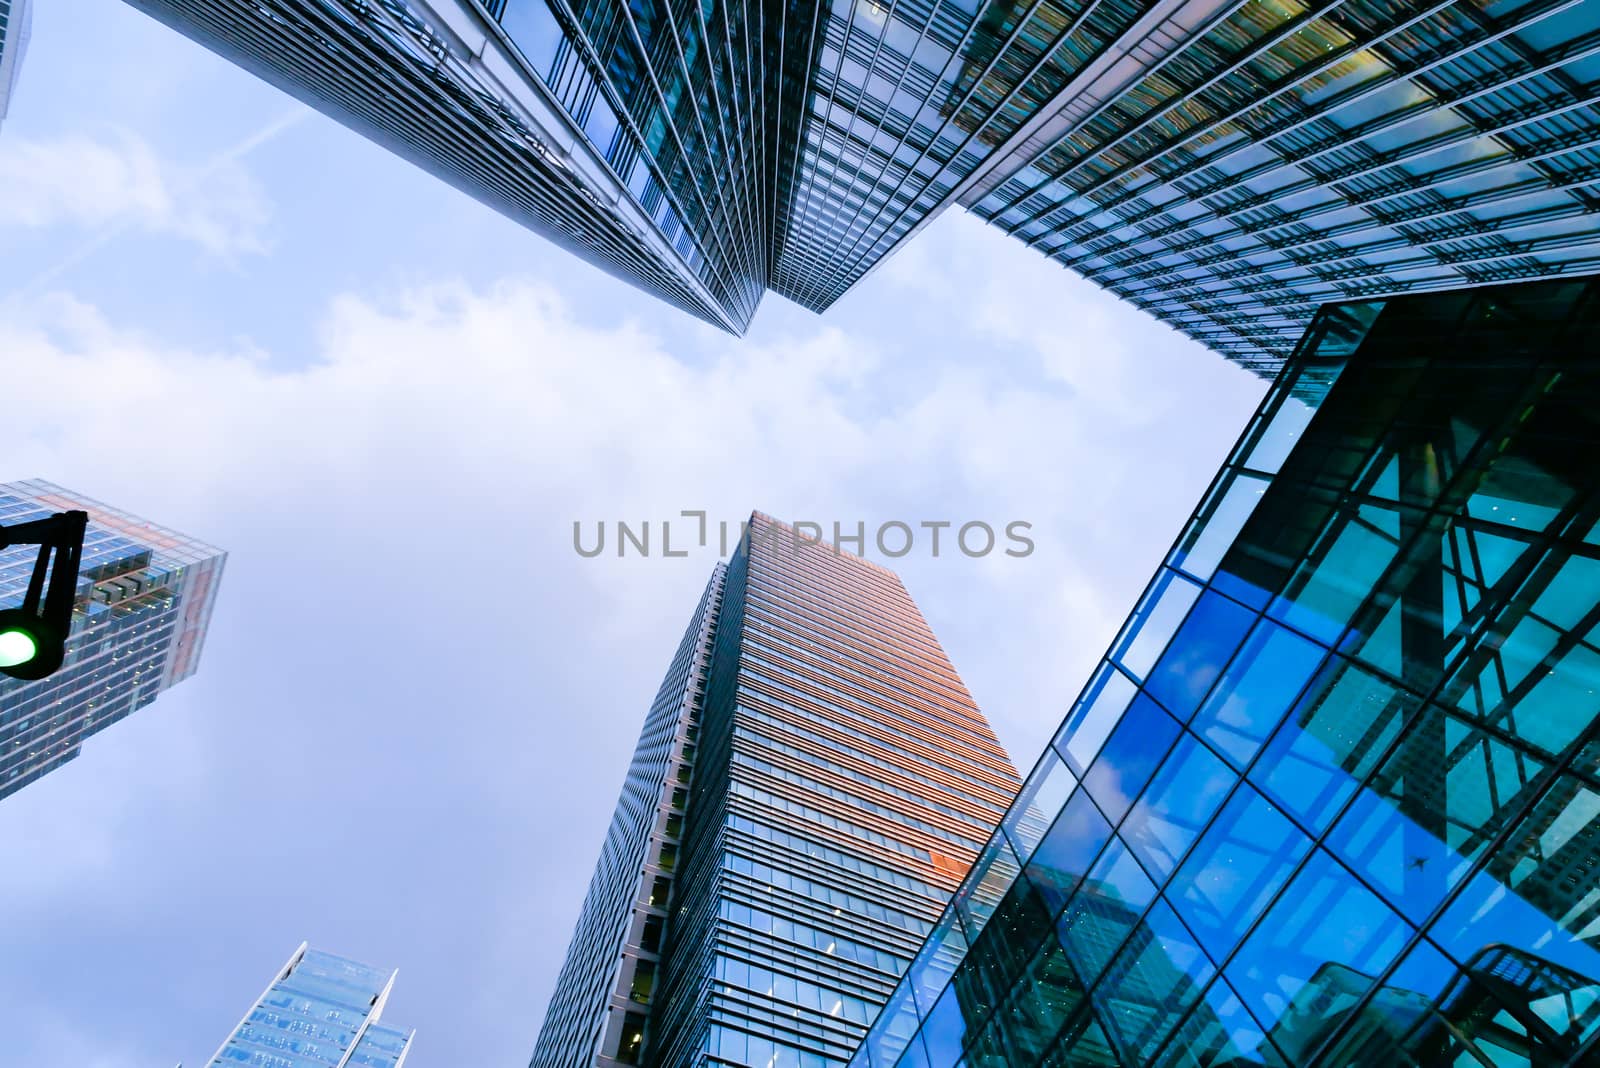 London office building skyscraper, working & meeting by Alicephoto